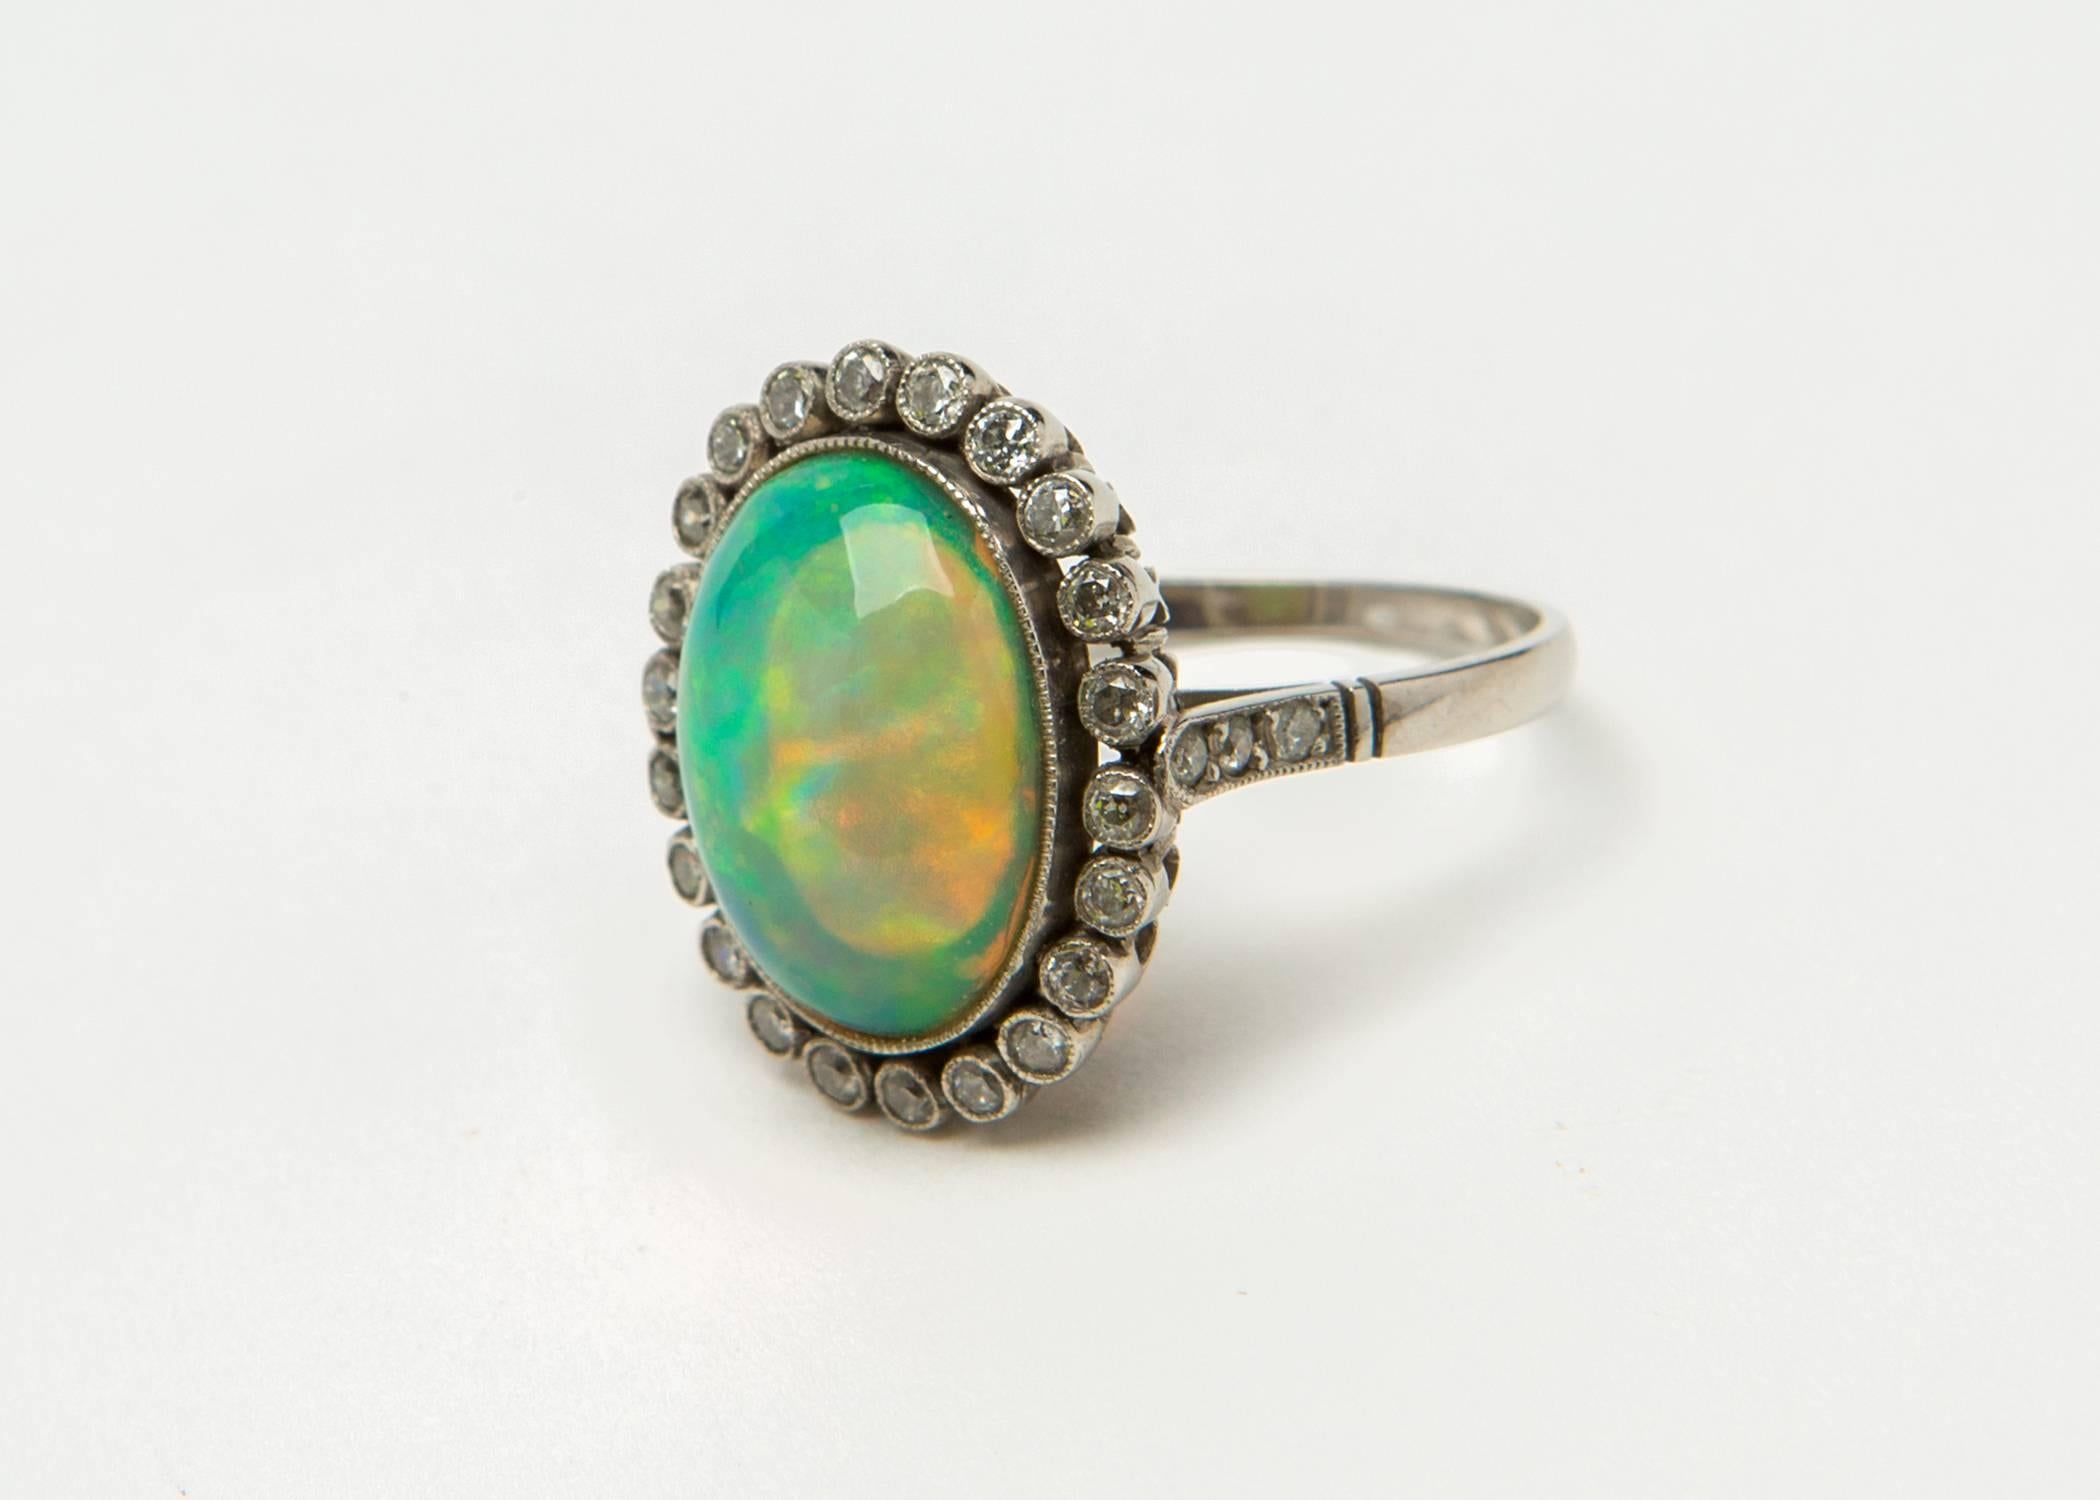 This extremely bright opal has significant flashes of green and blue and secondary orange coloration. The platinum mounting with vintage design detailing is set with a full circle of diamonds. The top of the ring is 3/4's of an inch in length. The